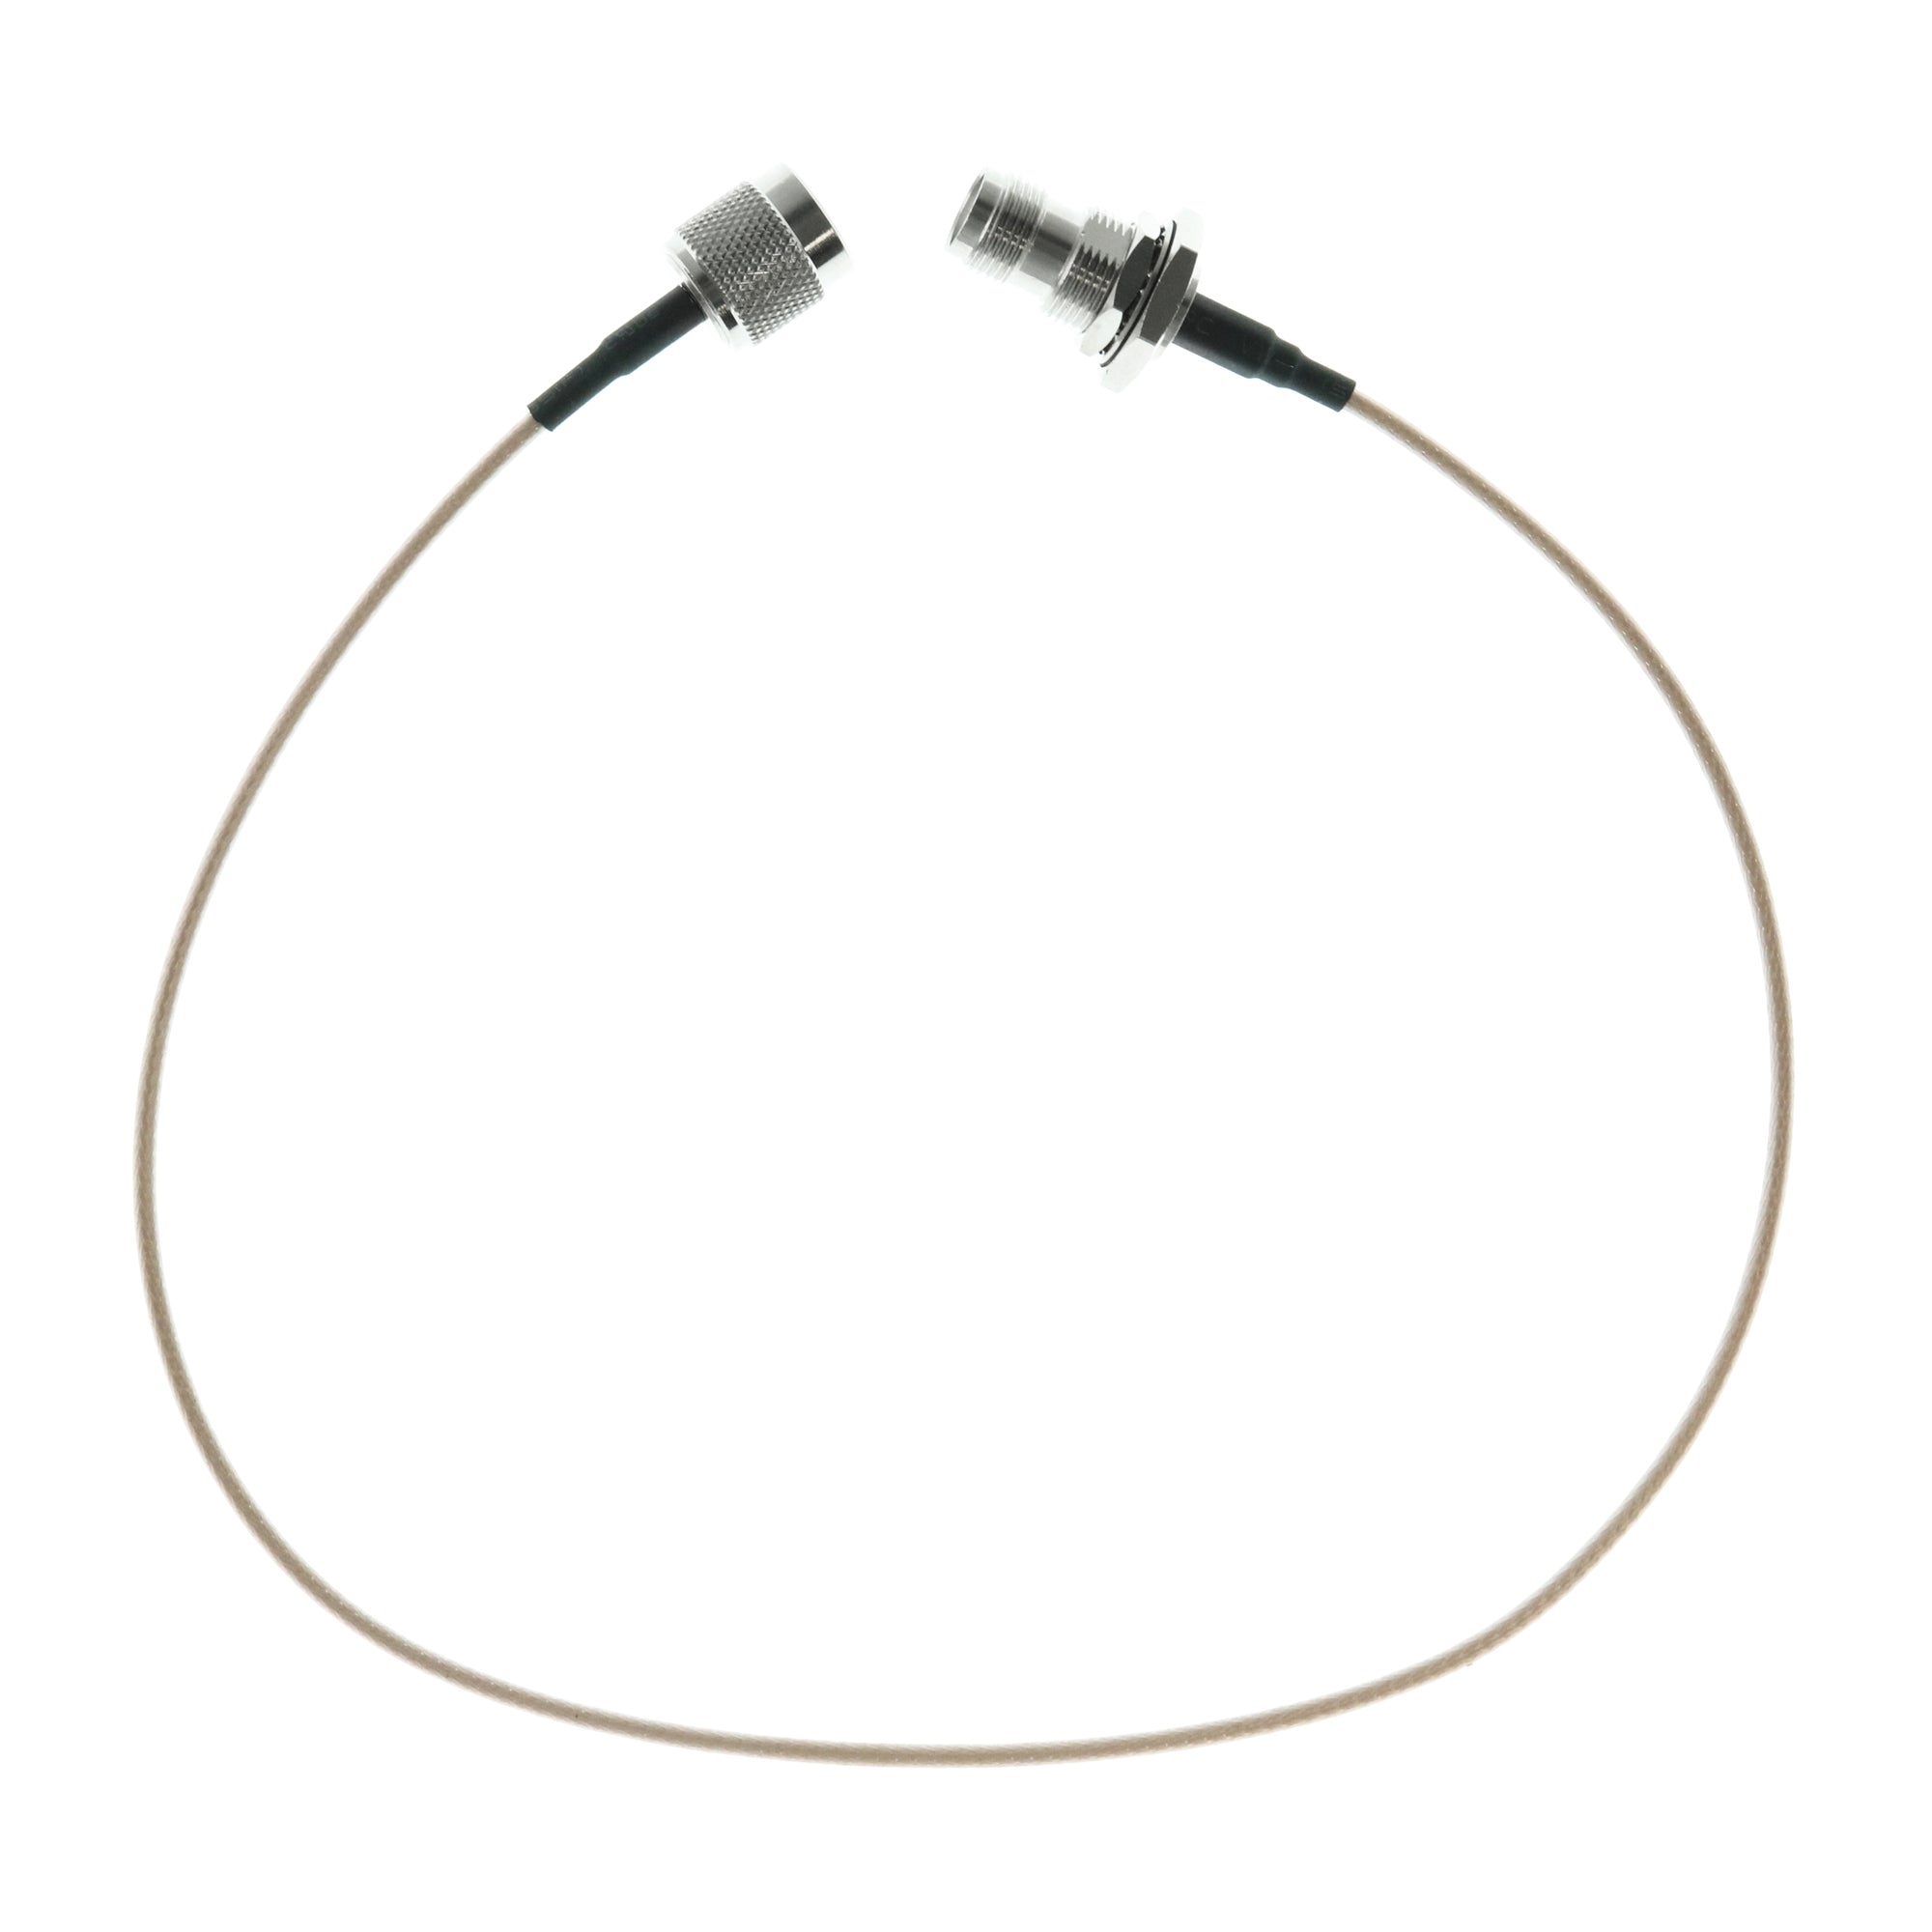 Bently Nevada, BENTLEY NEVADA COAXIAL RF CABLE ASSEMBLY, M17/113-RG-316, MALE-FEMALE, 12-INCH